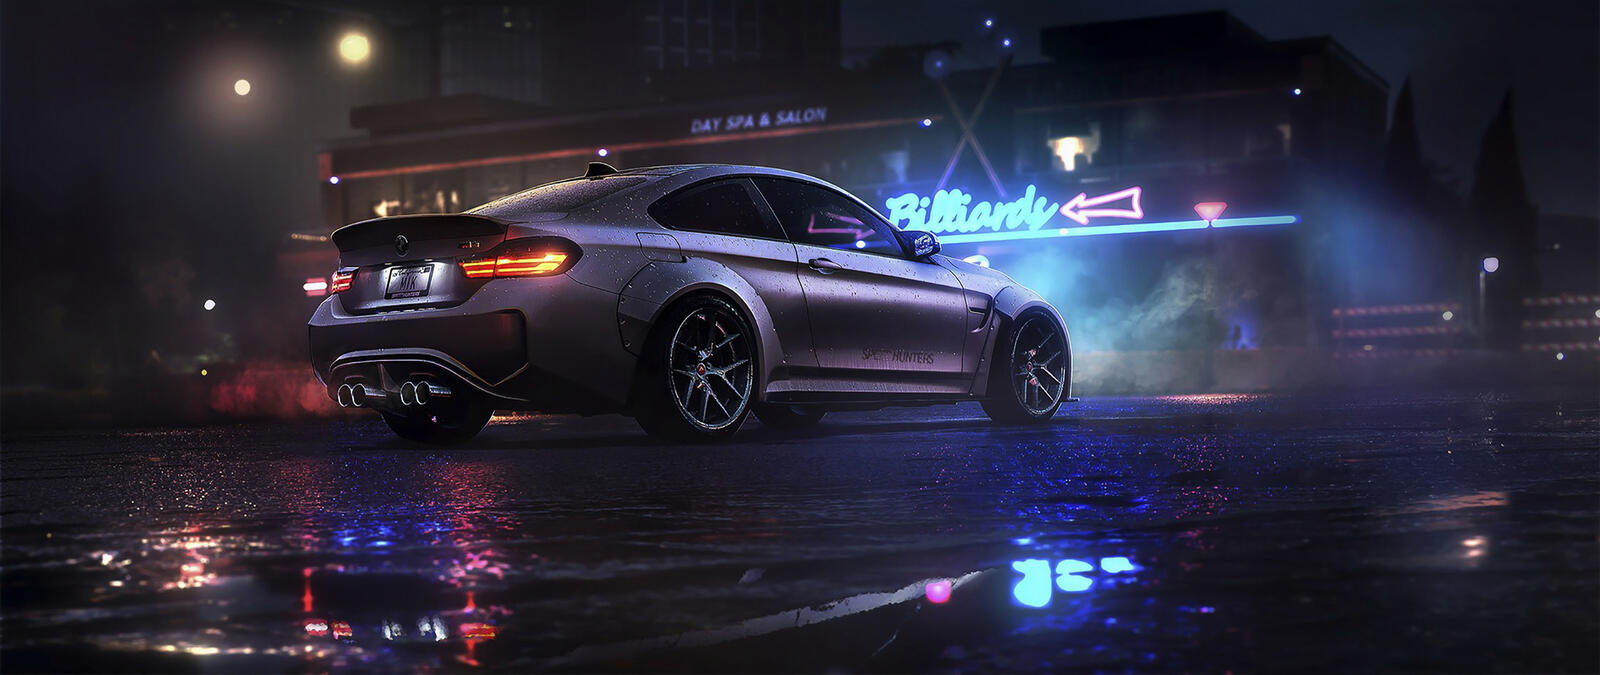 Wallpapers Need for Speed BMW cars on the desktop